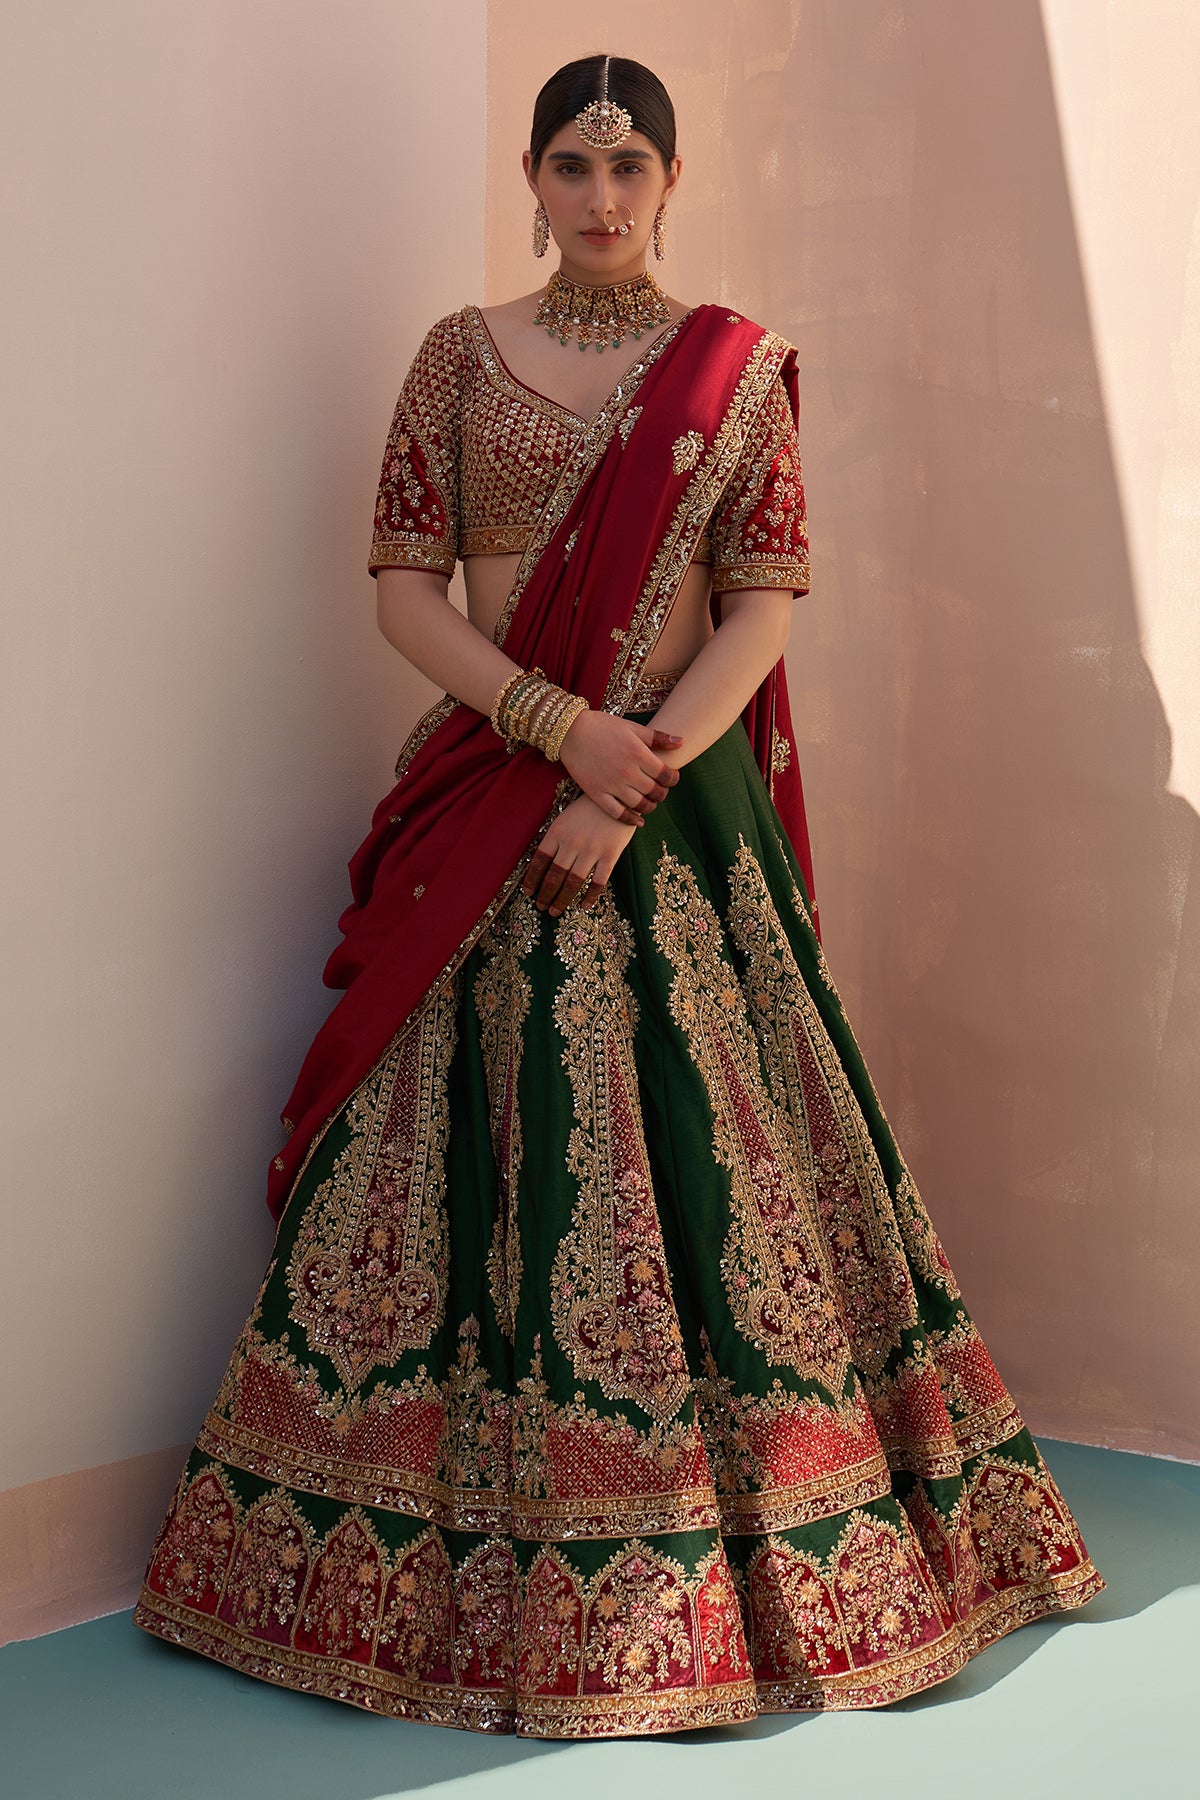 Beautiful Hand Embroidered green Silk Lehenga with red contrast net dupatta.  | Embroidered wedding, Half saree designs, Bridal wear